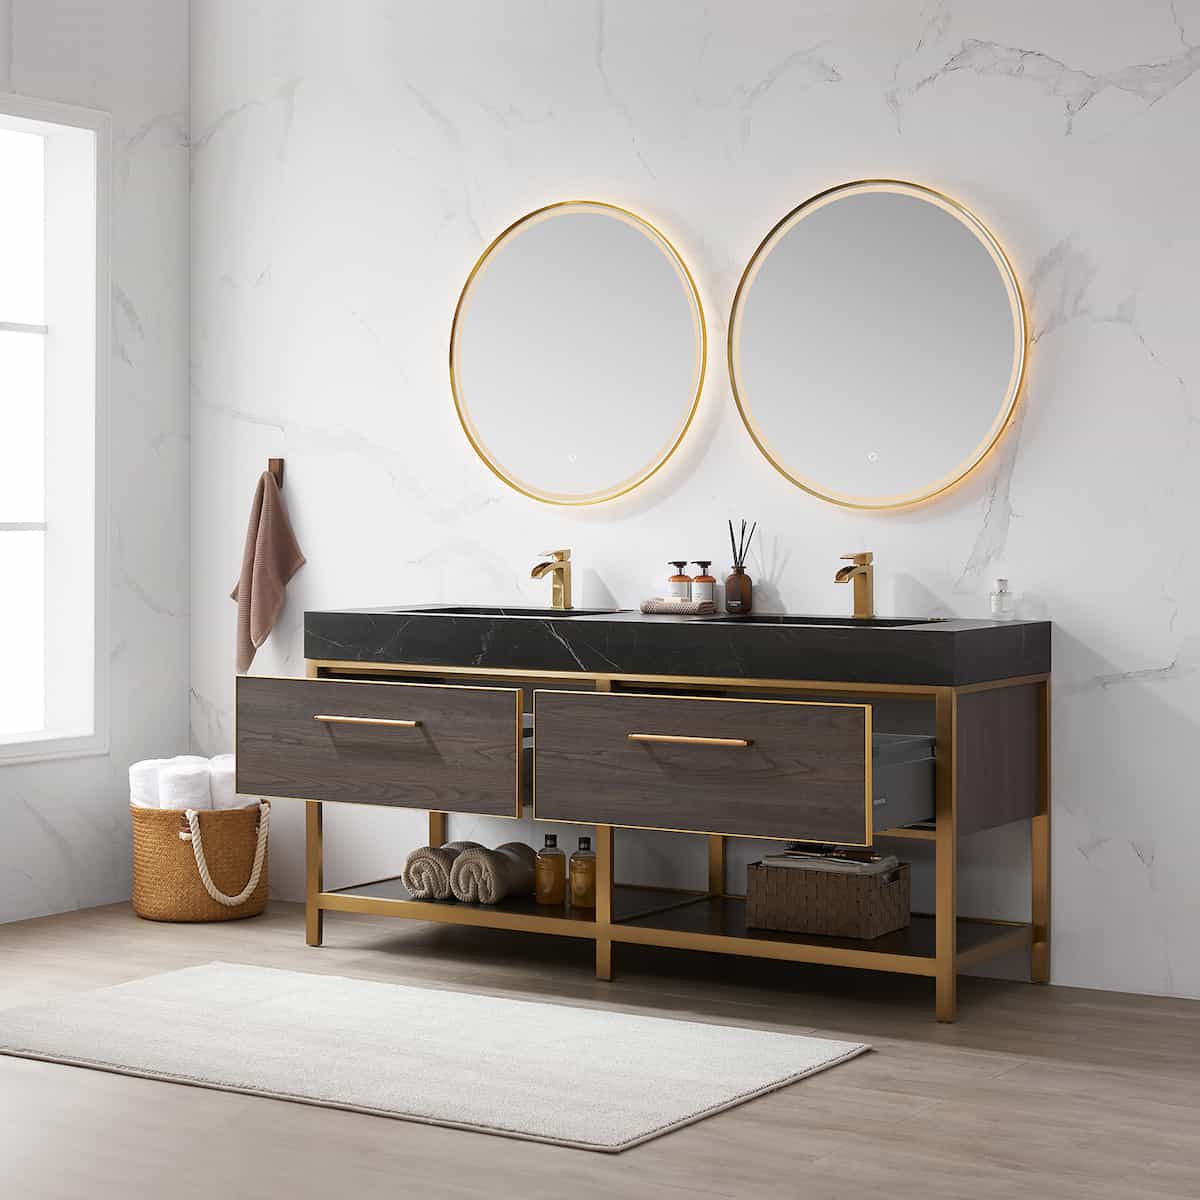 Vinnova Segovia 72 Inch Freestanding Double Sink Bath Vanity in Suleiman Oak with Black Sintered Stone Top With Mirrors Drawers 702072-SO-SL #mirror_with mirror